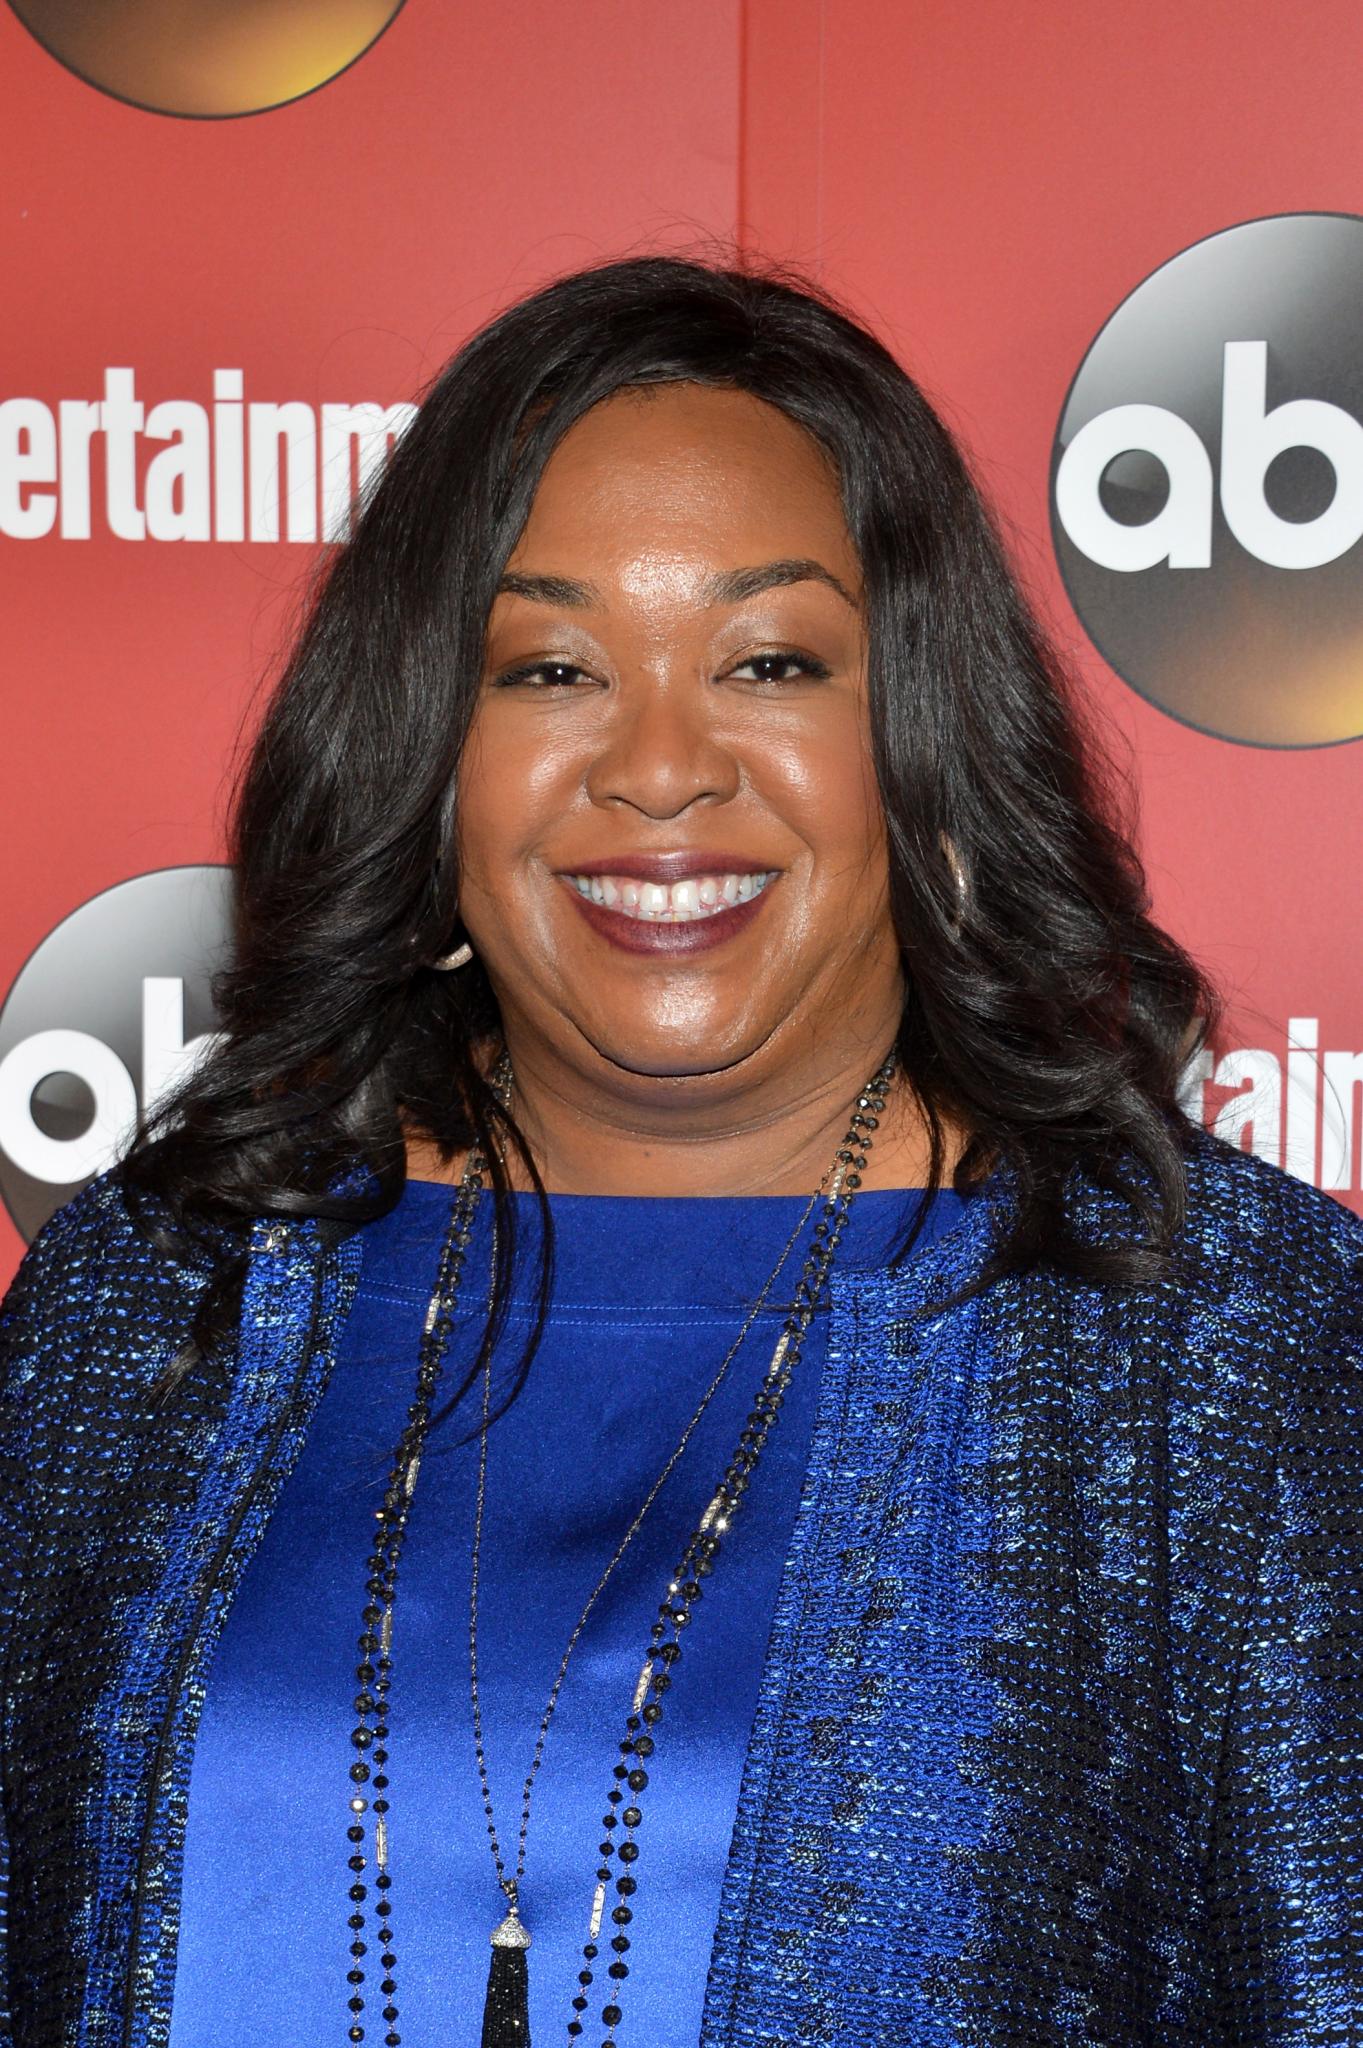 Shonda Rhimes “A Tiny Bit Pissed Off” About the Need for Diversity Award